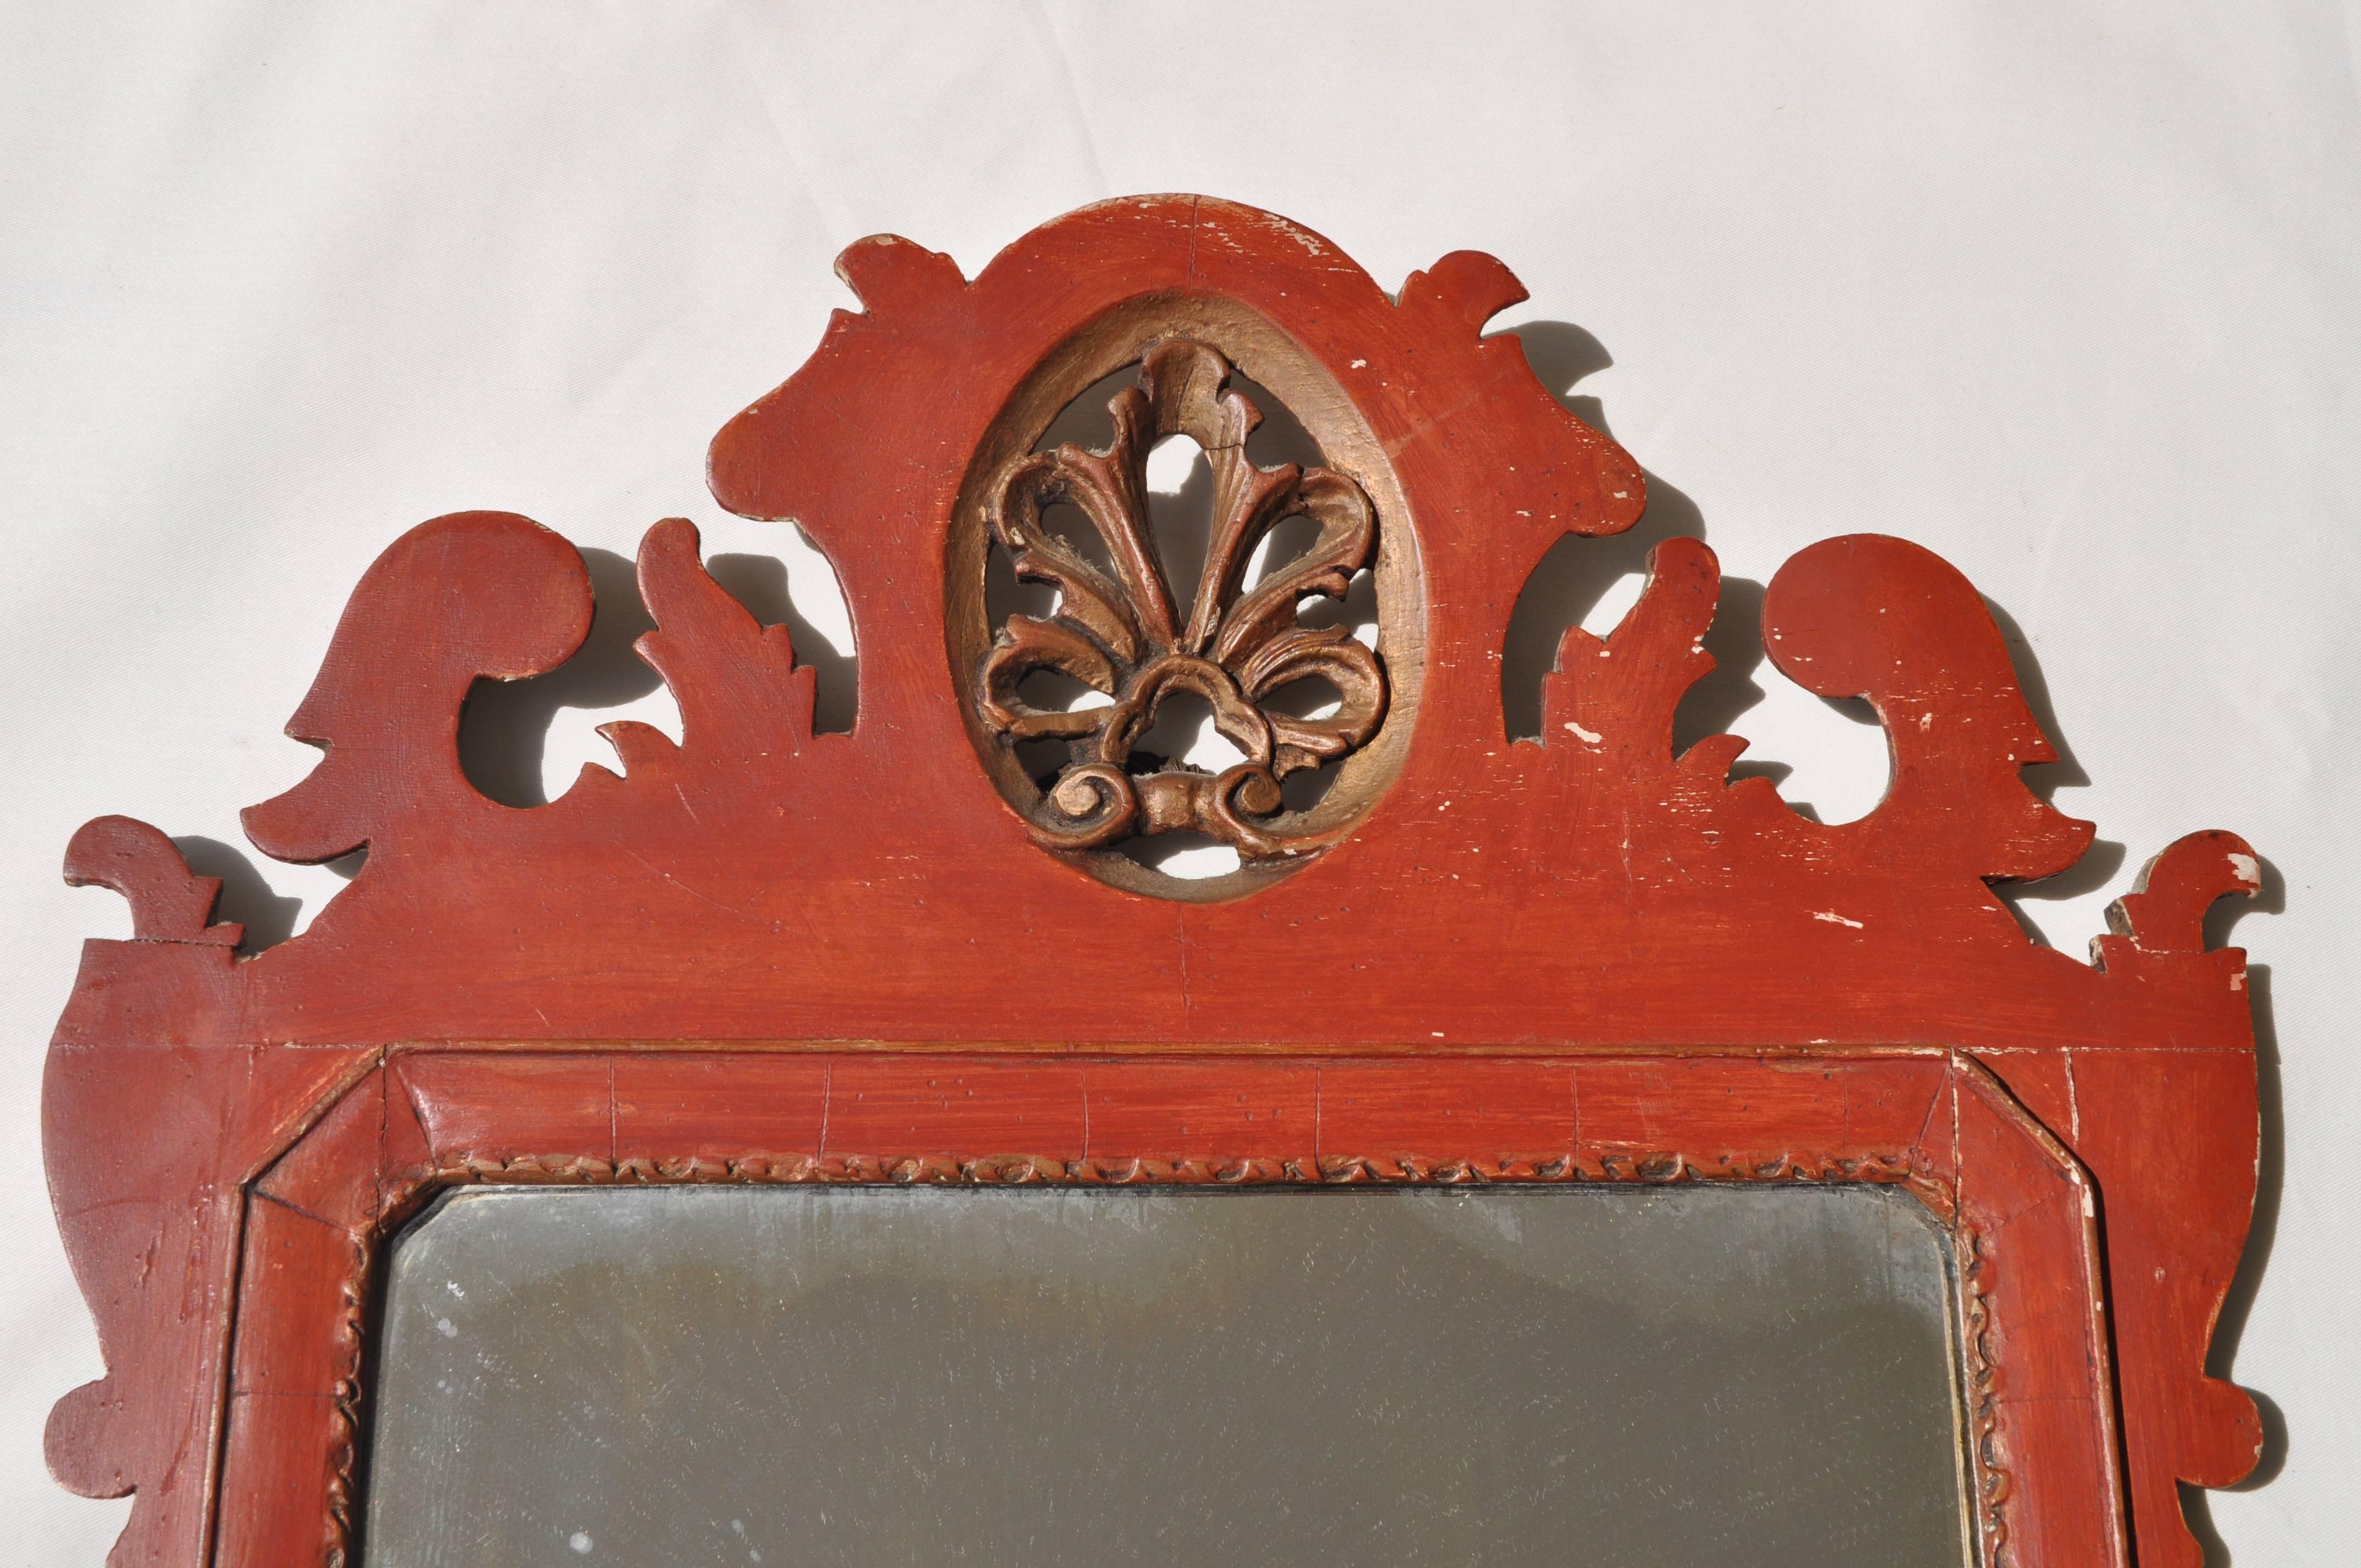 A beautiful carved and highly decorative 18th century mirror with original dark ochre and gold paintwork. The mirror has a date, a crest and initials carved on the back - '1742' 'A H W' 'London', as shown in the photographs.